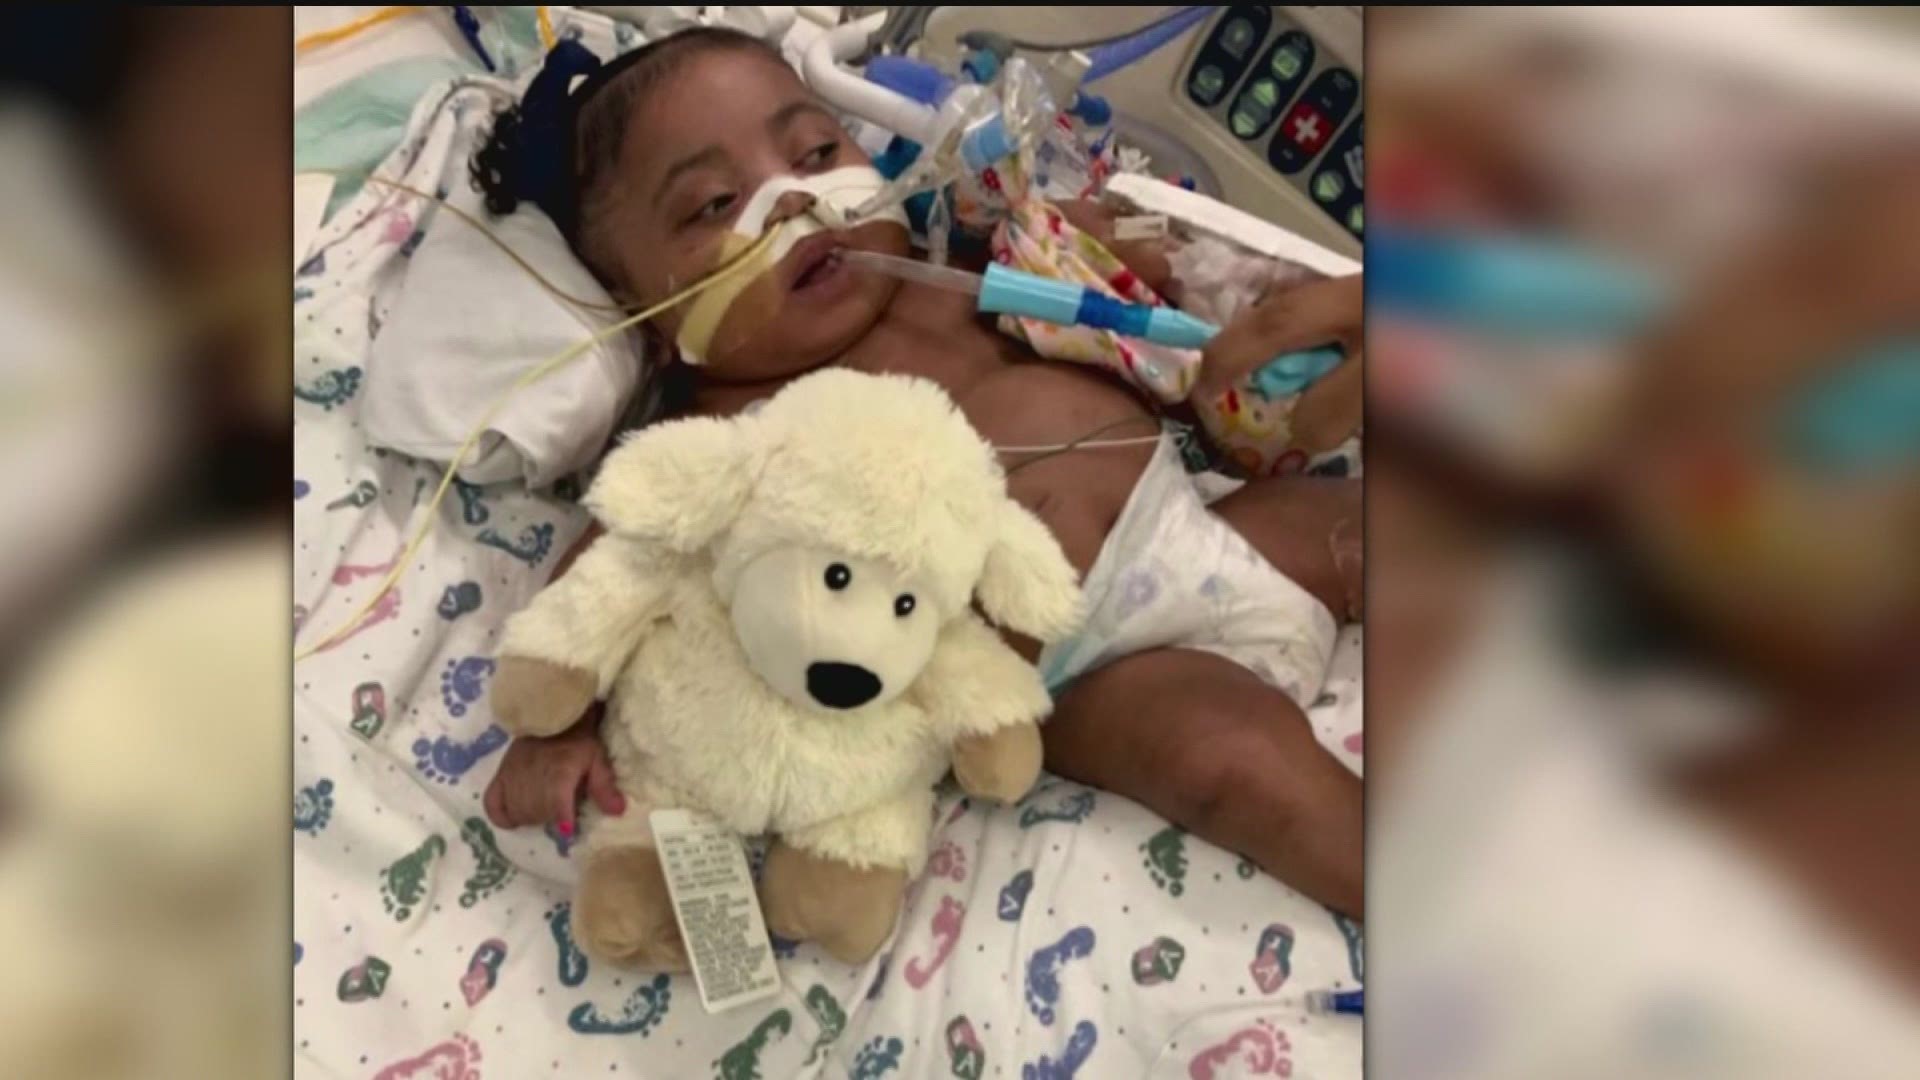 Cook Children's said that Texas has spent $24 million in Medicaid to help keep Tinslee Lewis alive, according to an appeal filed on April 16.